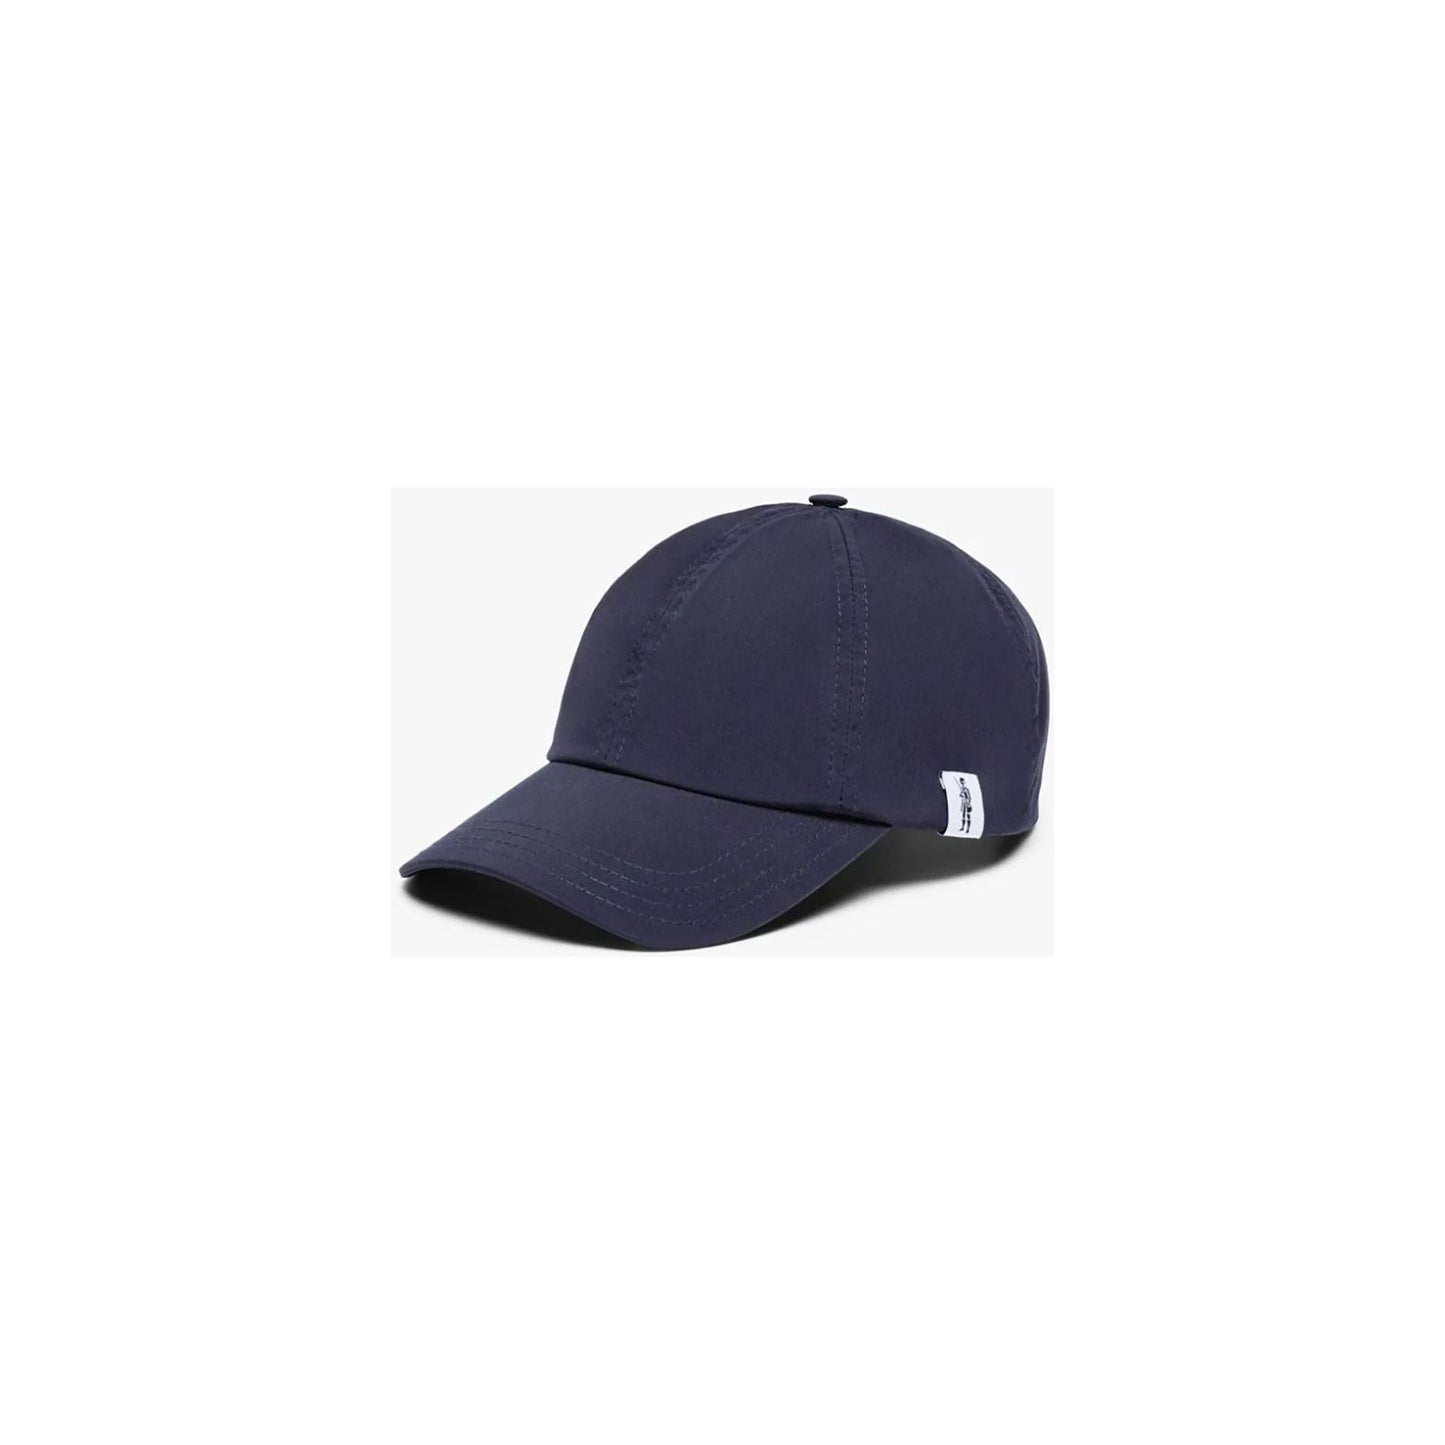 A Tipping Baseball Cap, Navy with a curved brim, featuring a small white tag on the side and the Dandy Man logo by Mackintosh.